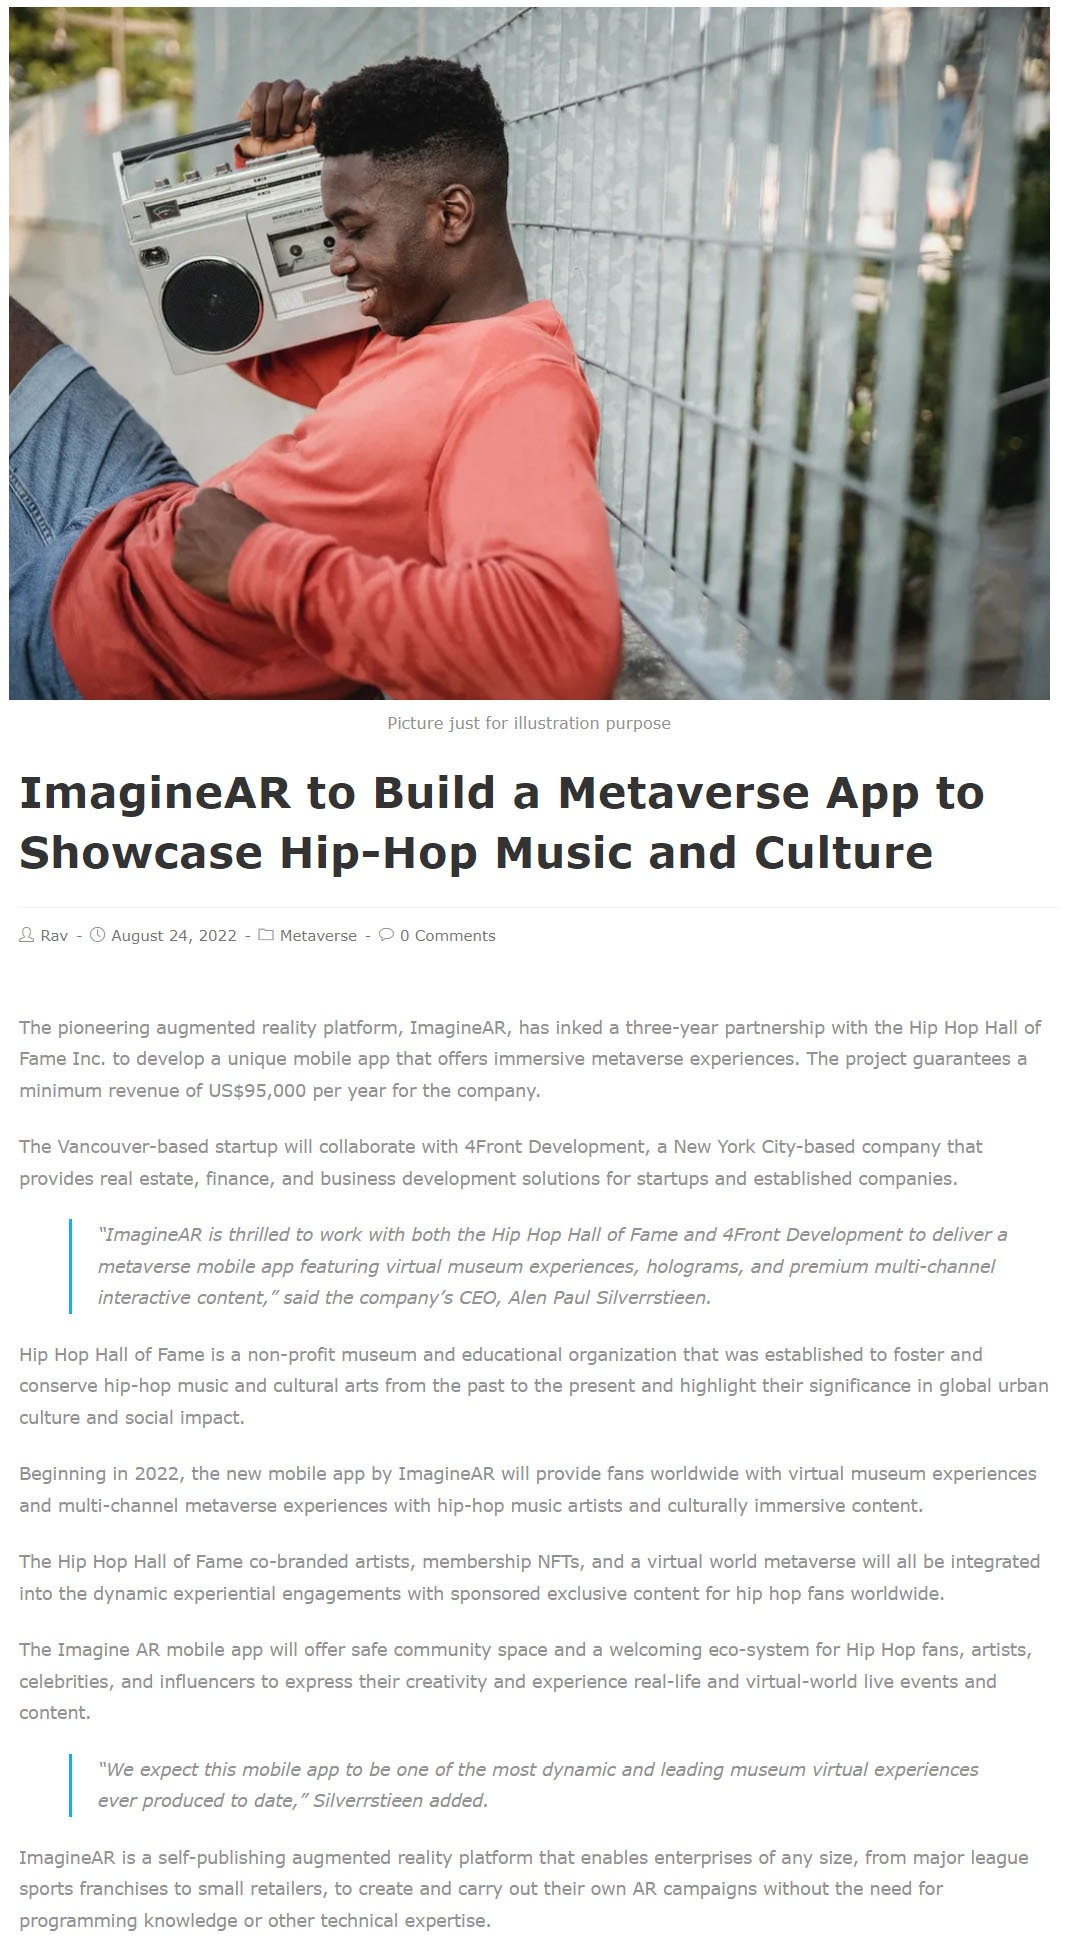 Metaverse App to Showcase Hip-Hop Music and Culture